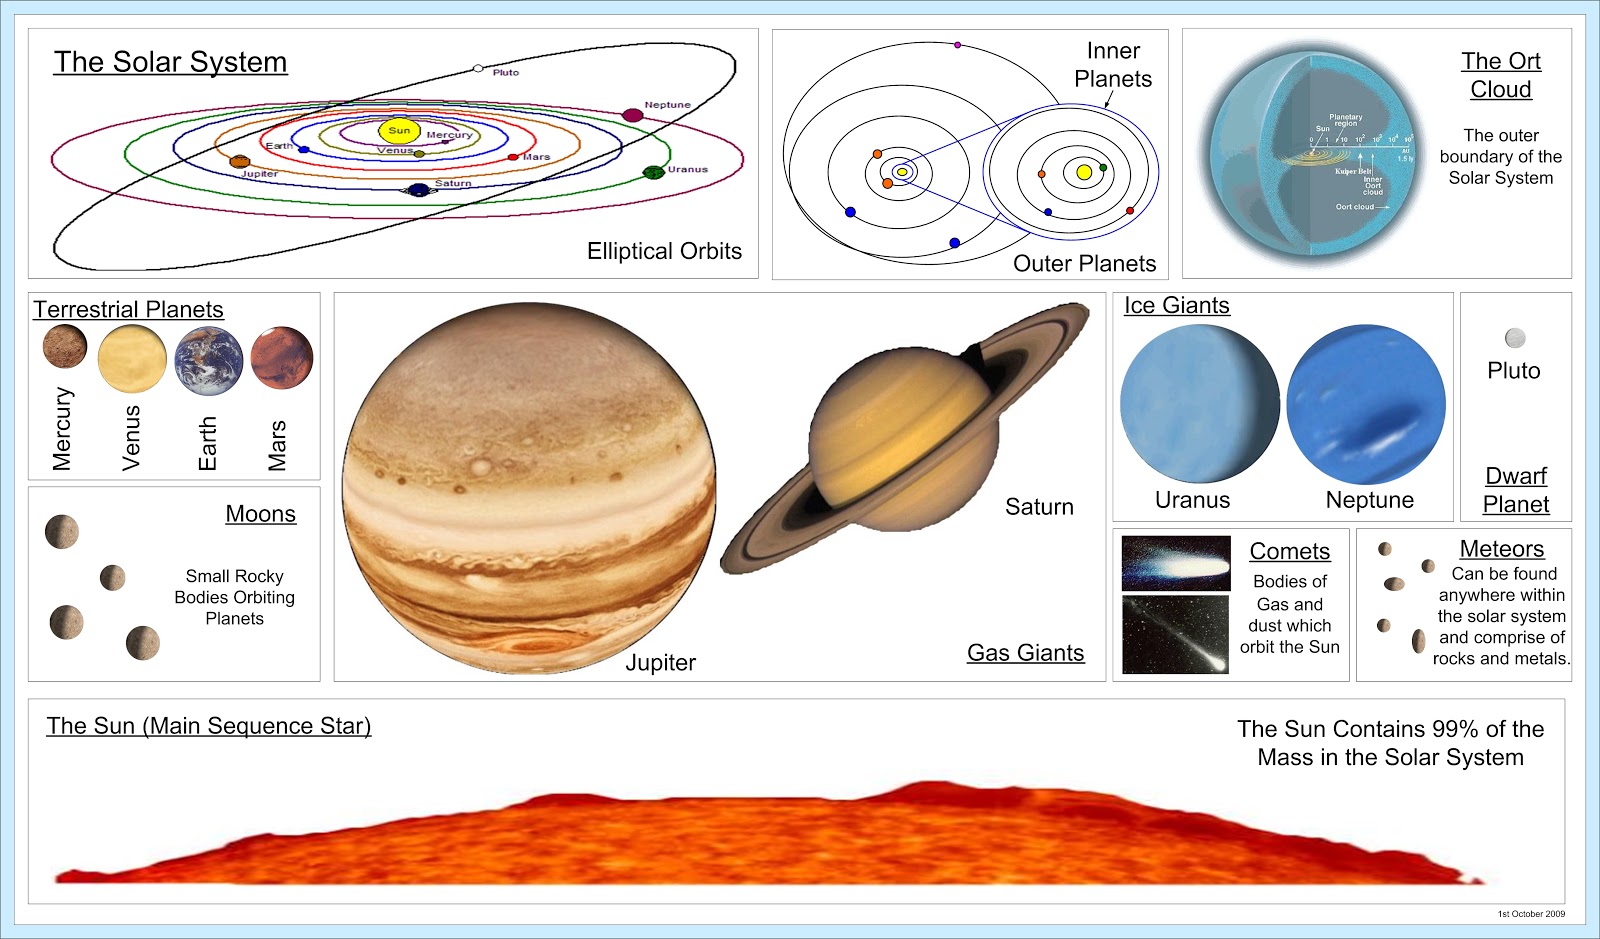 Solar System posters: Free Posters of the planets / solar system